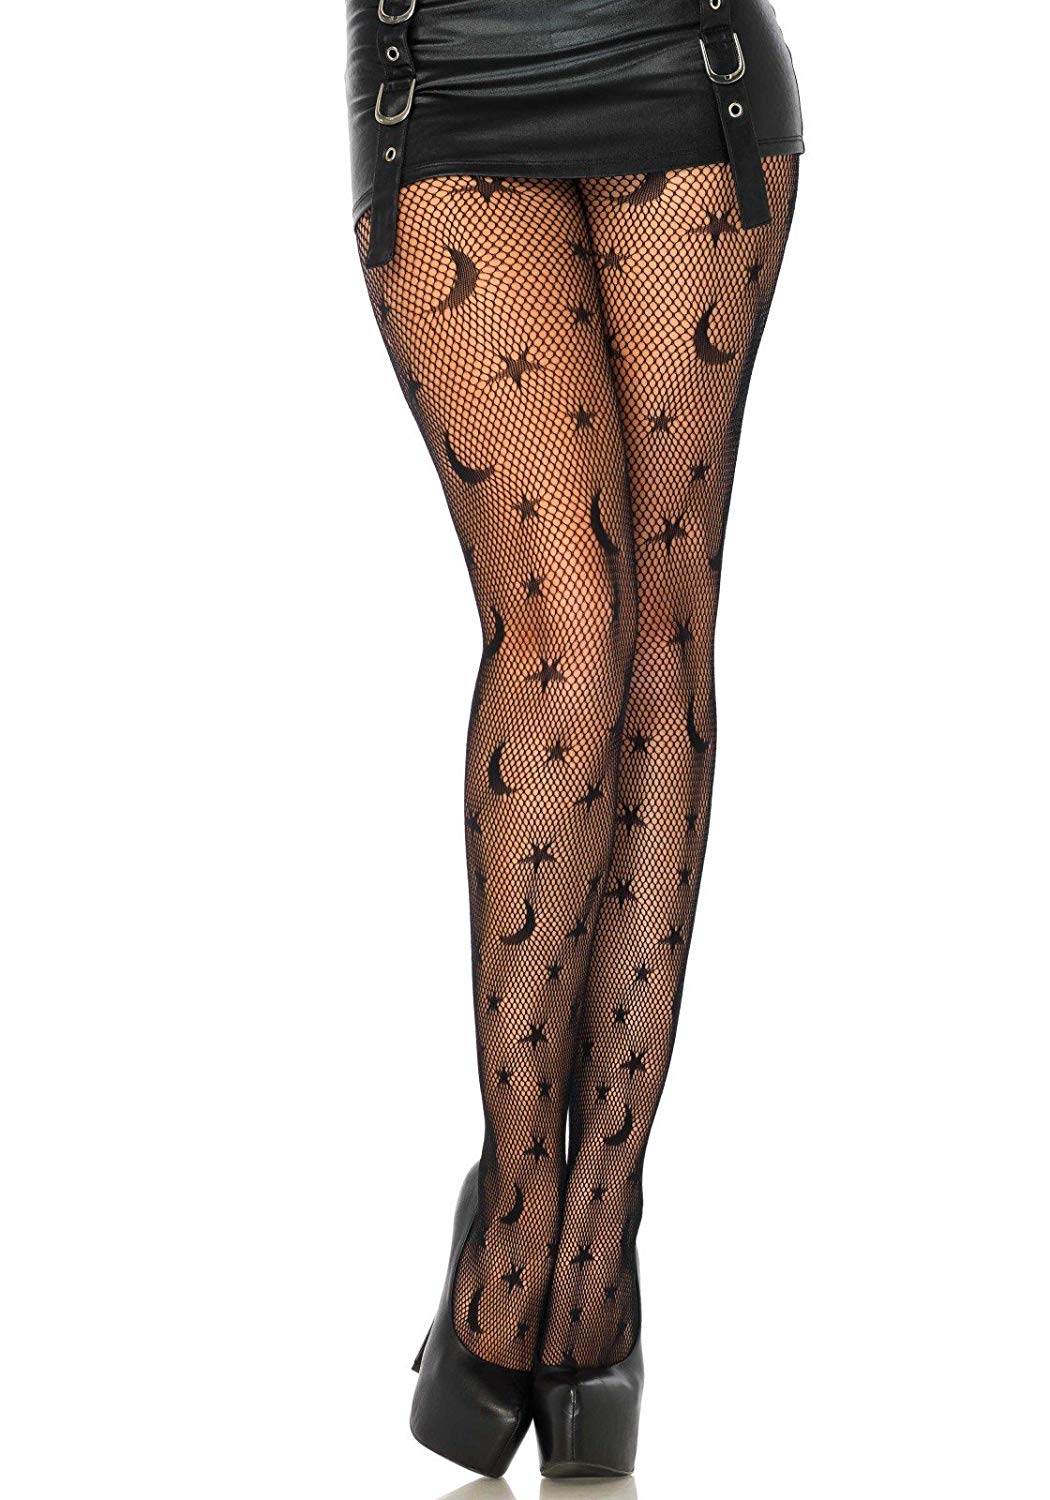 Halloween Tights & Stockings For Any Costume 2019